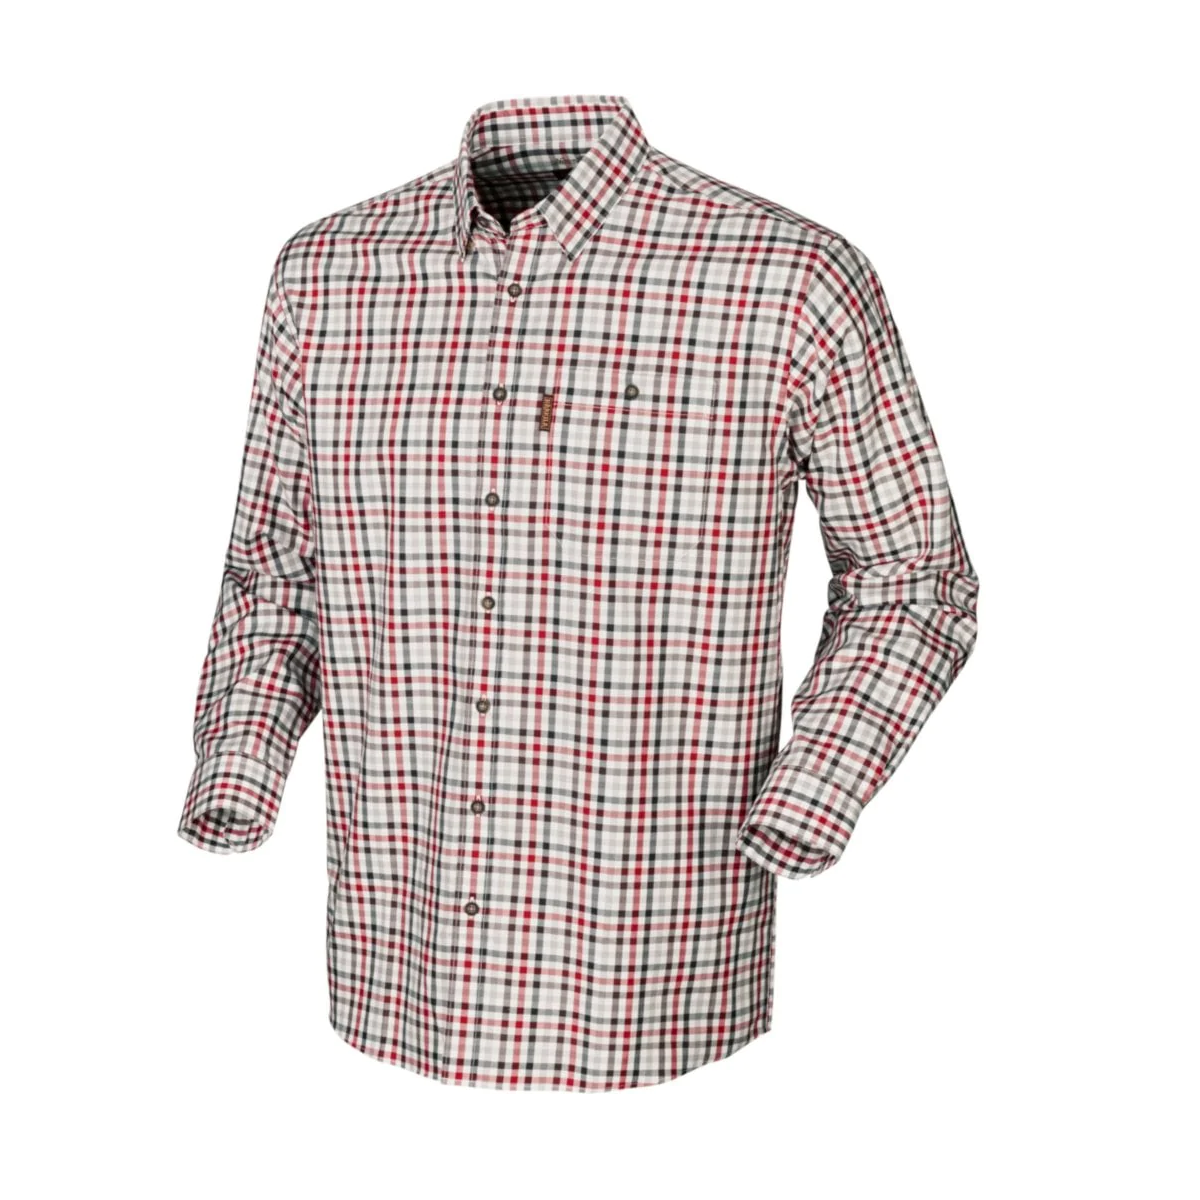 Harkila Milford Shirt - Jester Red Check